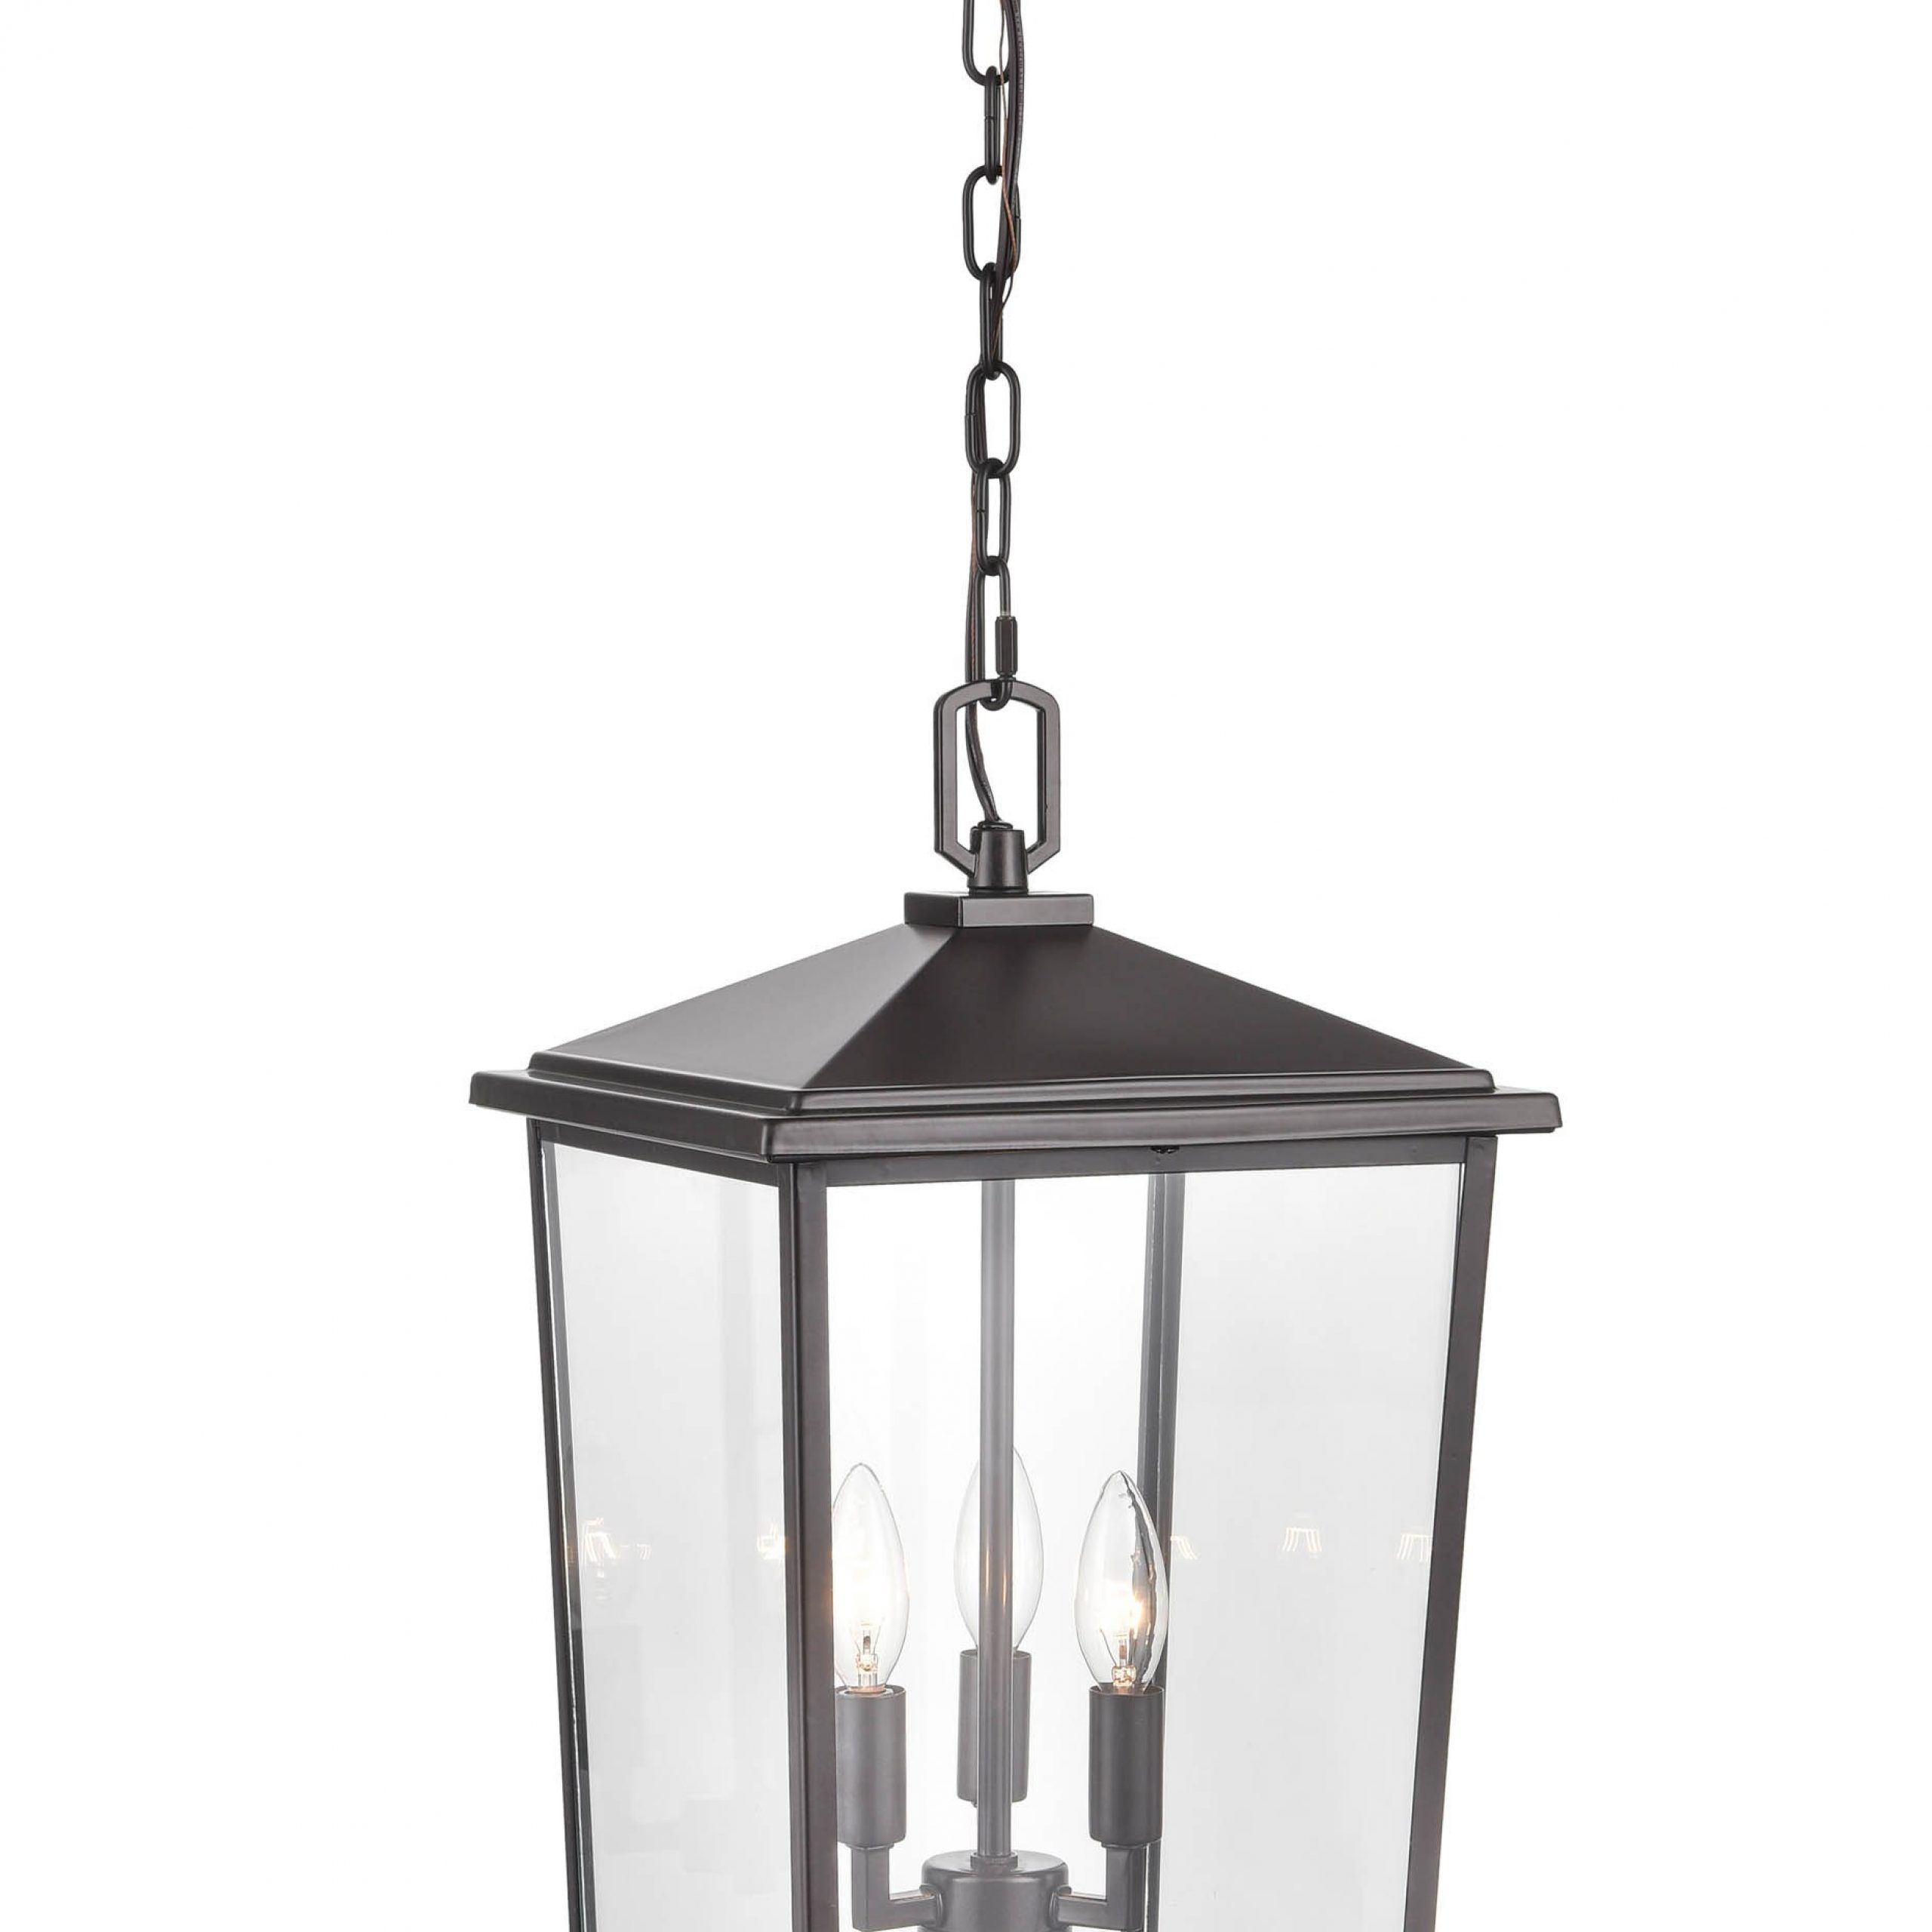 Millennium Lighting Fetterton 3 Light Powder Coat Bronze Transitional Clear  Glass Lantern Outdoor Pendant Light In The Pendant Lighting Department At  Lowes In Favorite White Powder Coat Lantern Chandeliers (View 5 of 10)